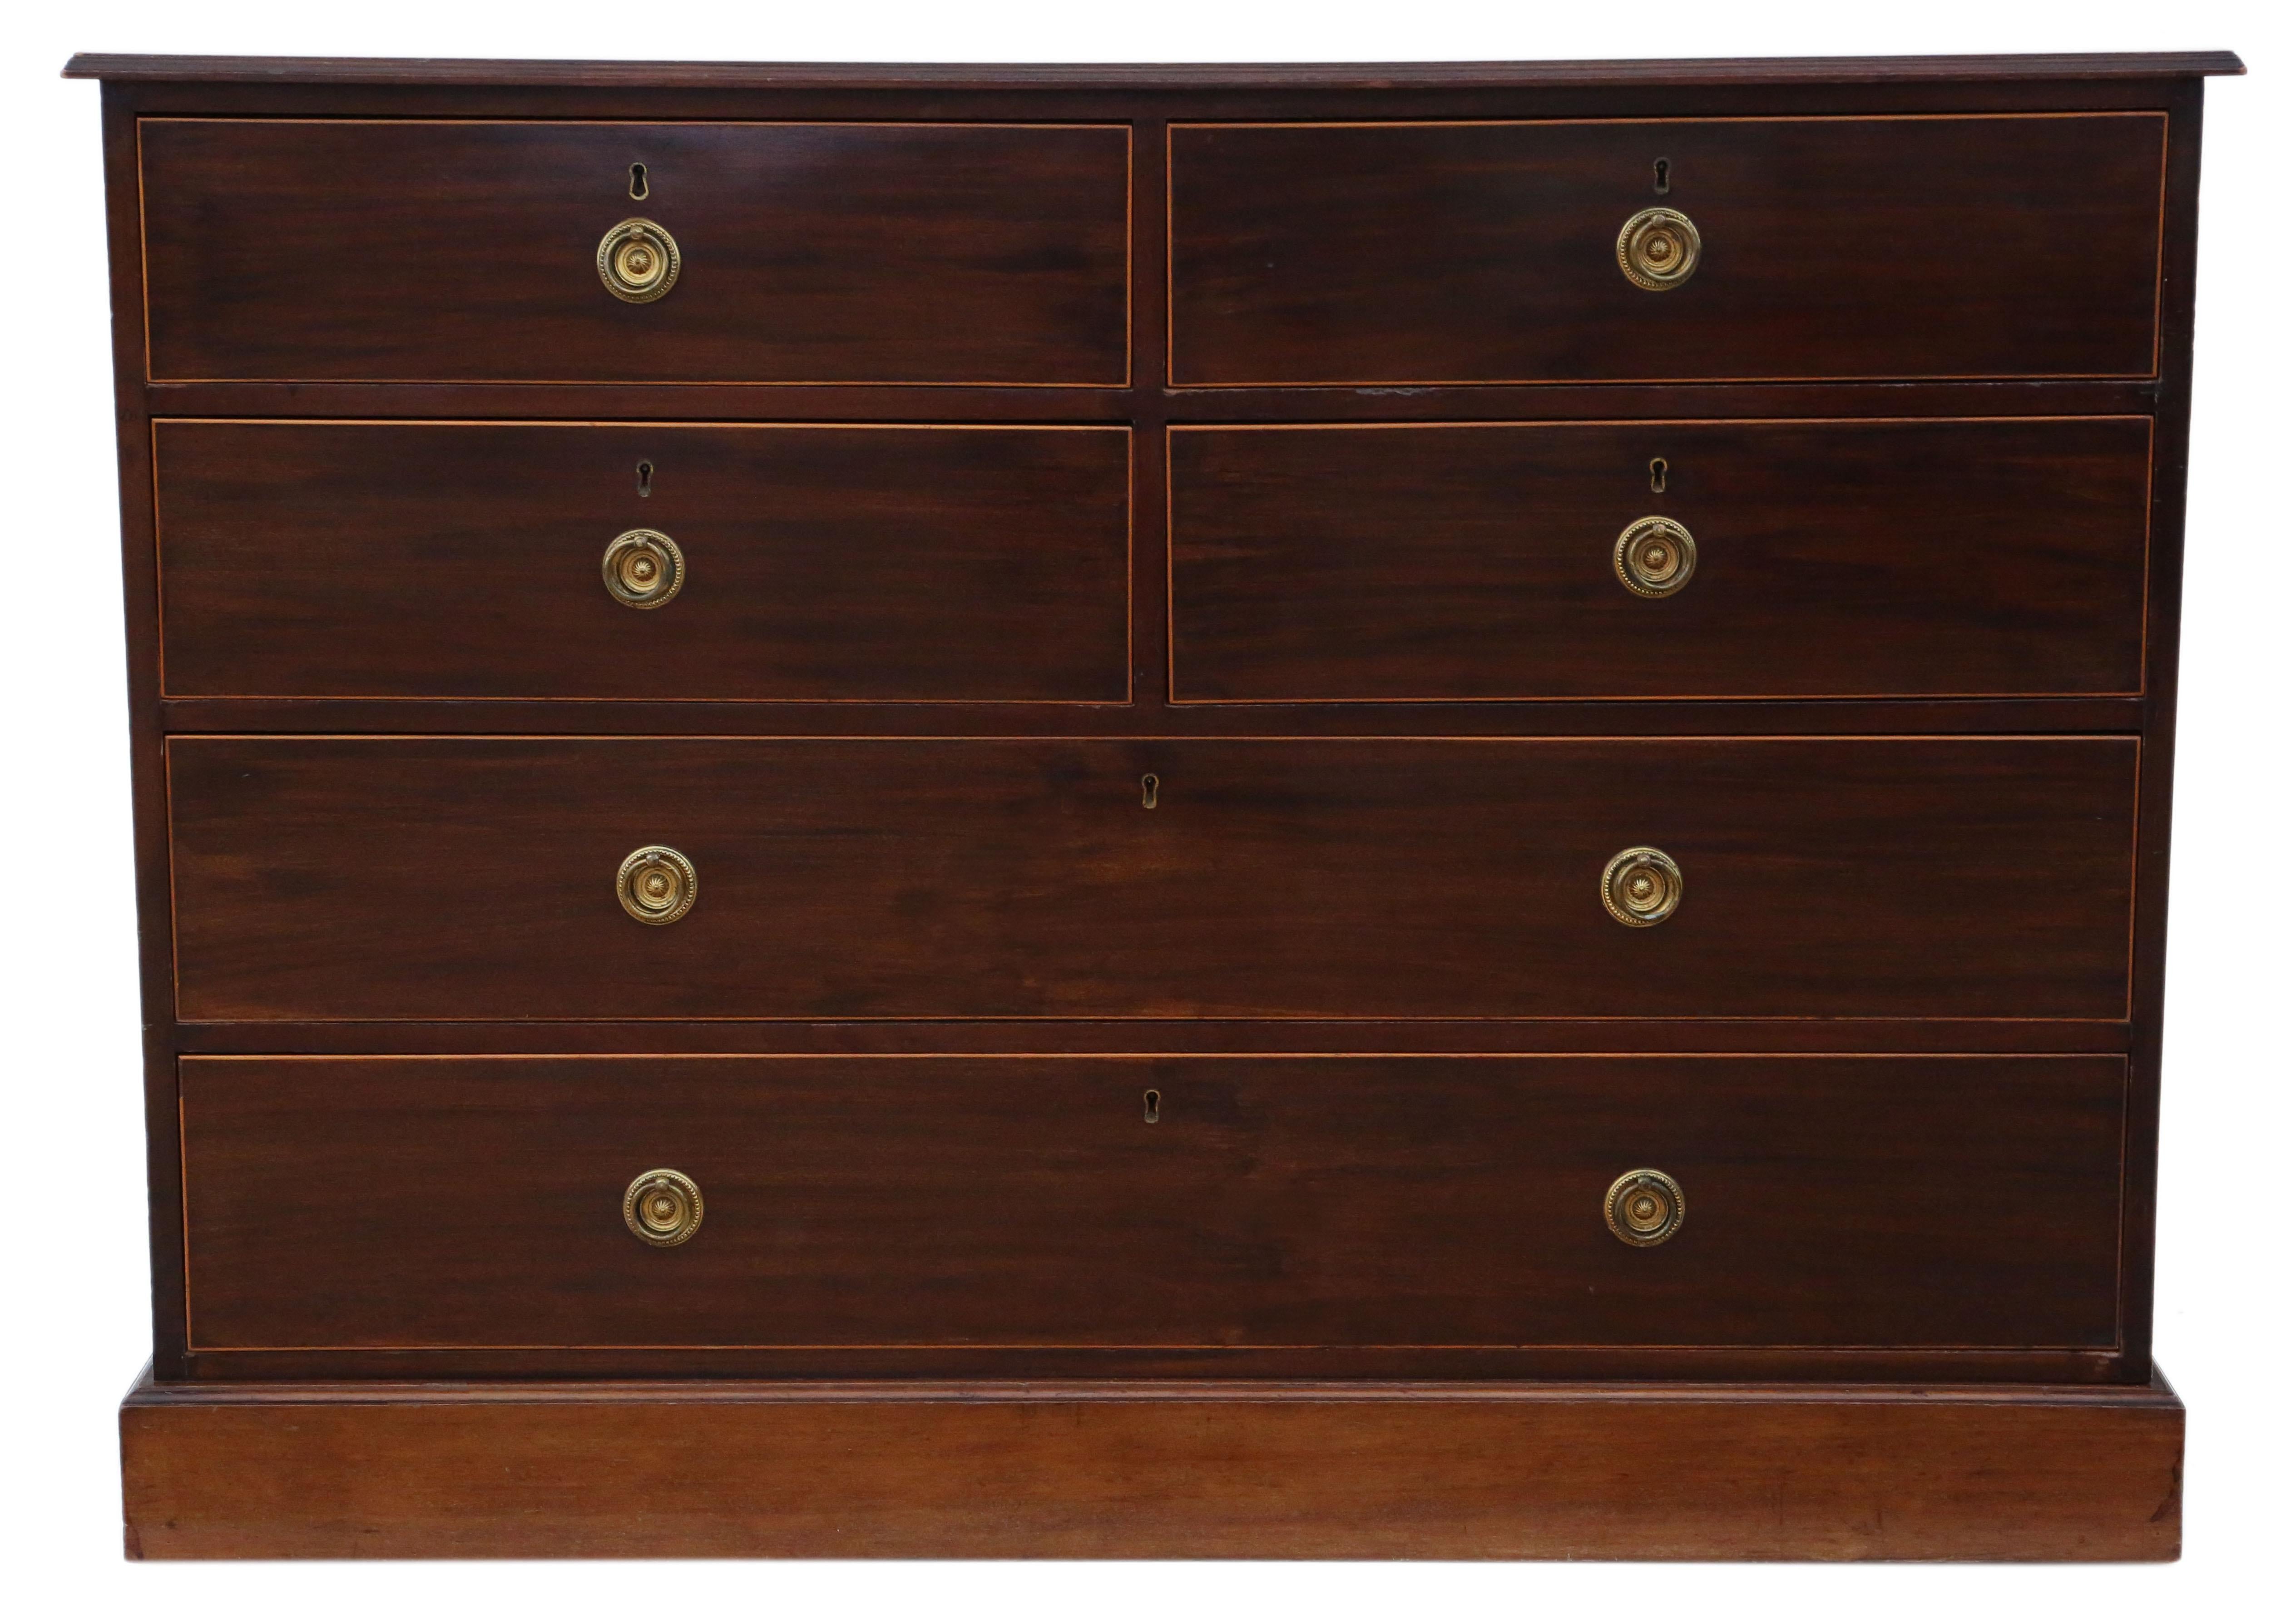 Antique fine quality 19th century inlaid mahogany chest of drawers by quality makers 'Mawer & Stephenson'. Concealed secret drawer behind the top right drawer.
This is a lovely chest with an attractive line edge inlay. Rare large Size with a